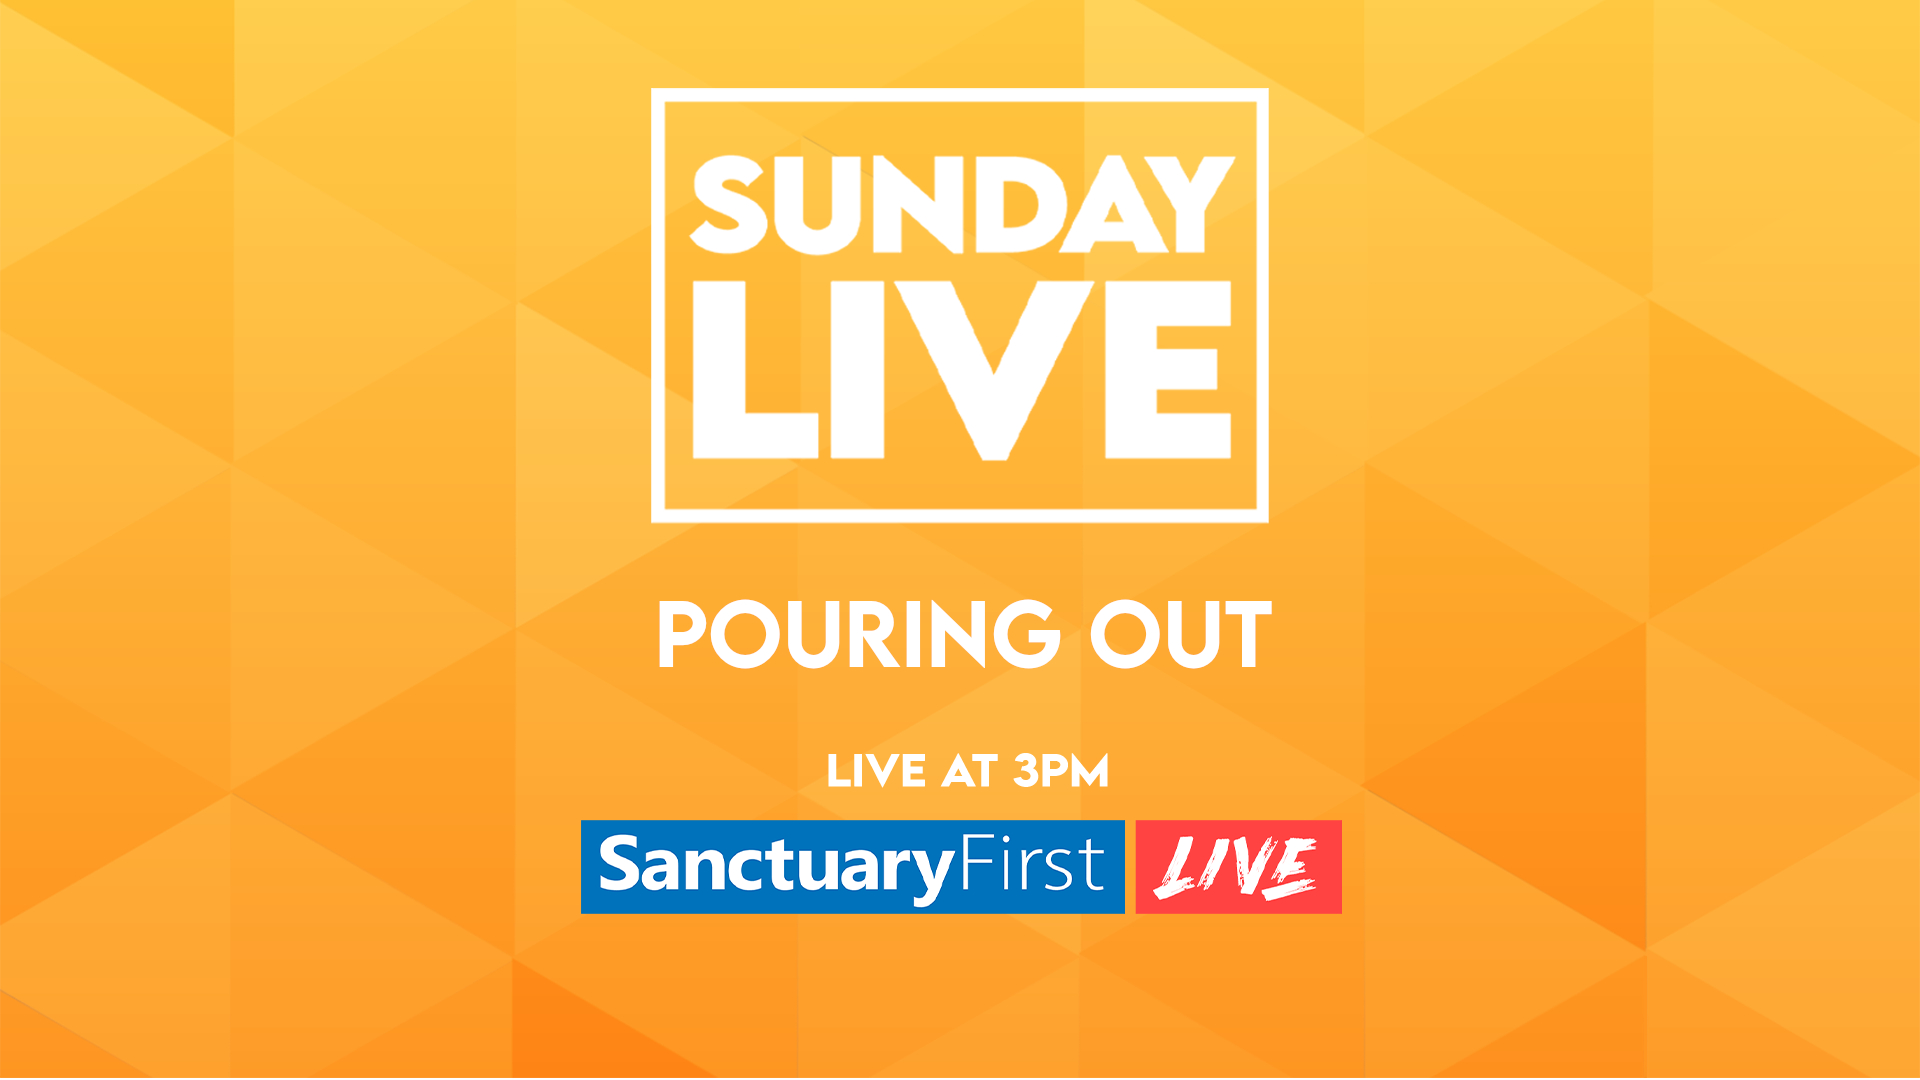 Sunday Live - Pouring Out